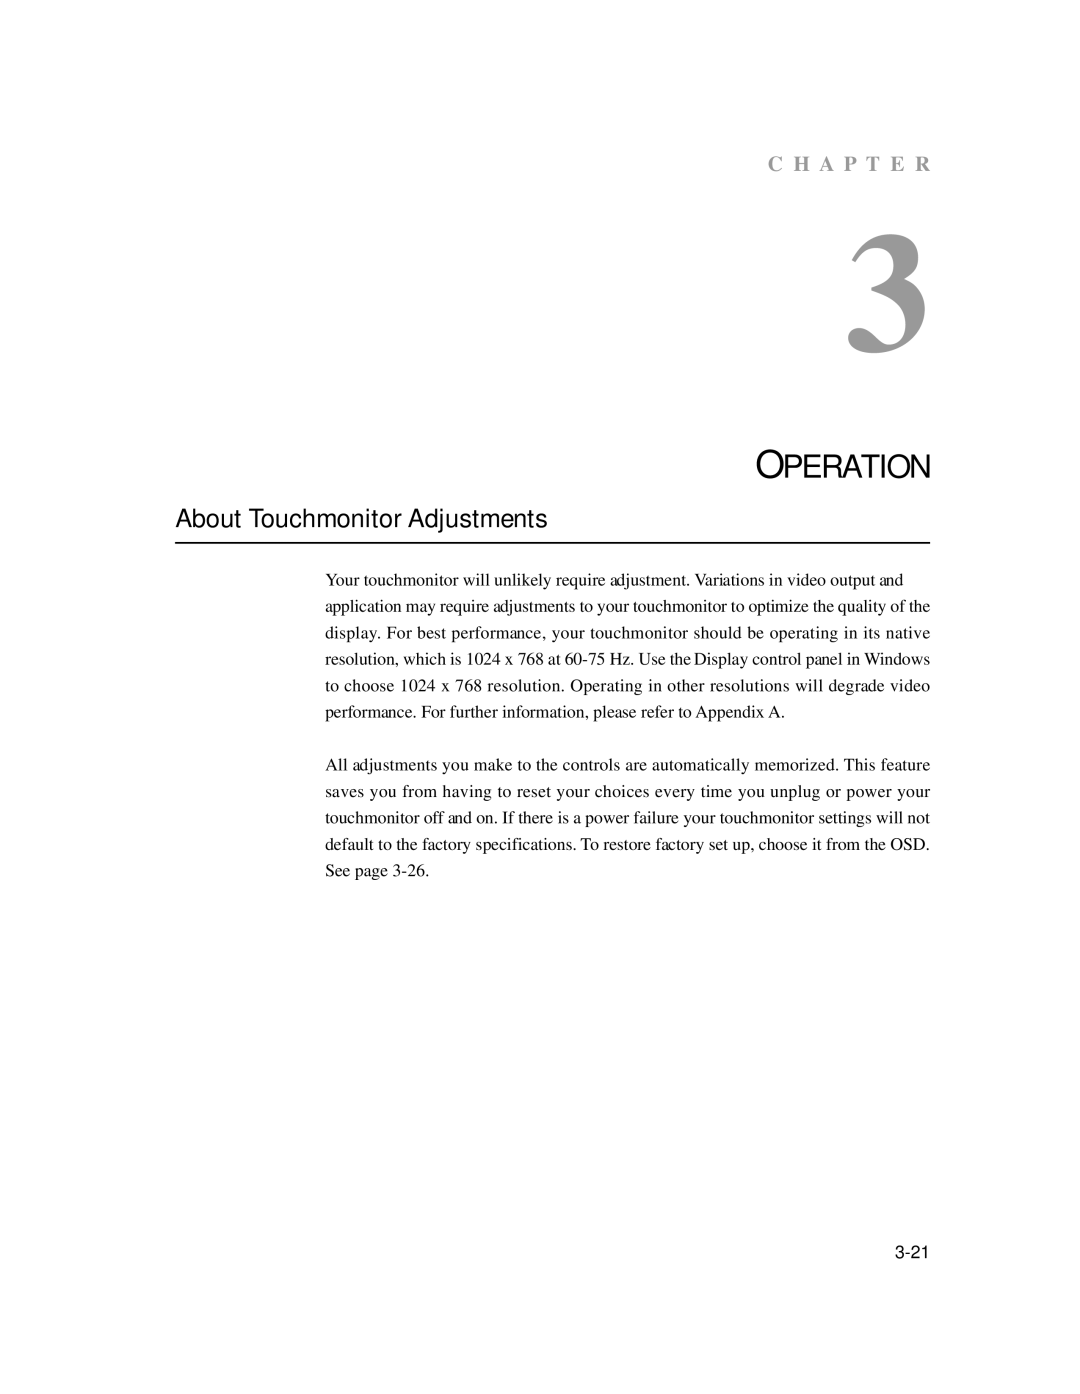 Elo TouchSystems 1522L manual Operation, About Touchmonitor Adjustments 